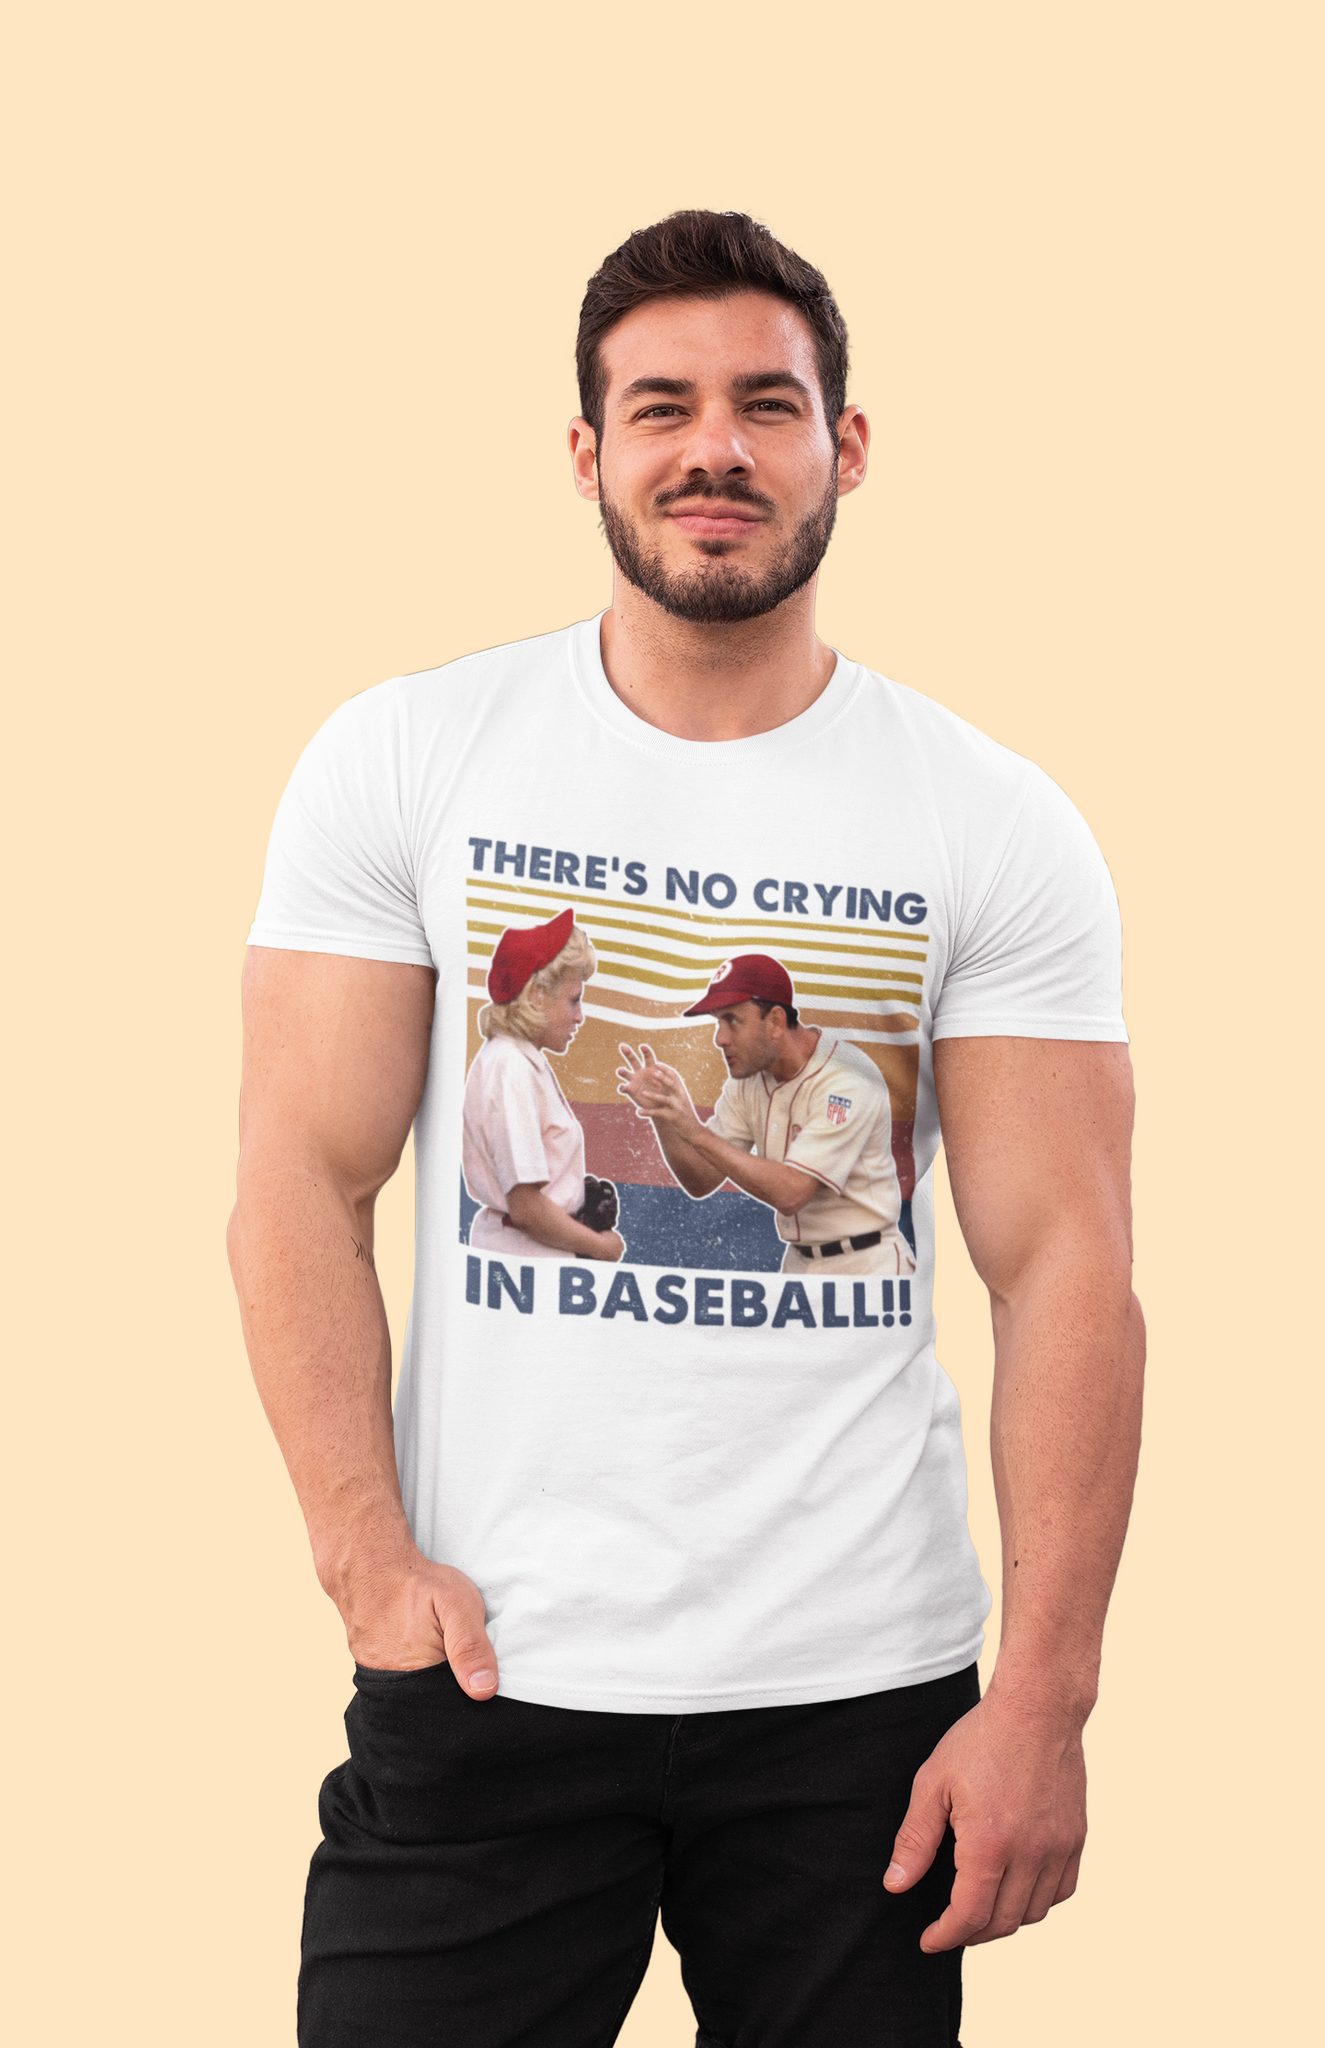 A League Of Their Own Vintage T Shirt, Jimmy Dugan Evelyn Gardner T Shirt, Theres No Crying In Baseball Tshirt